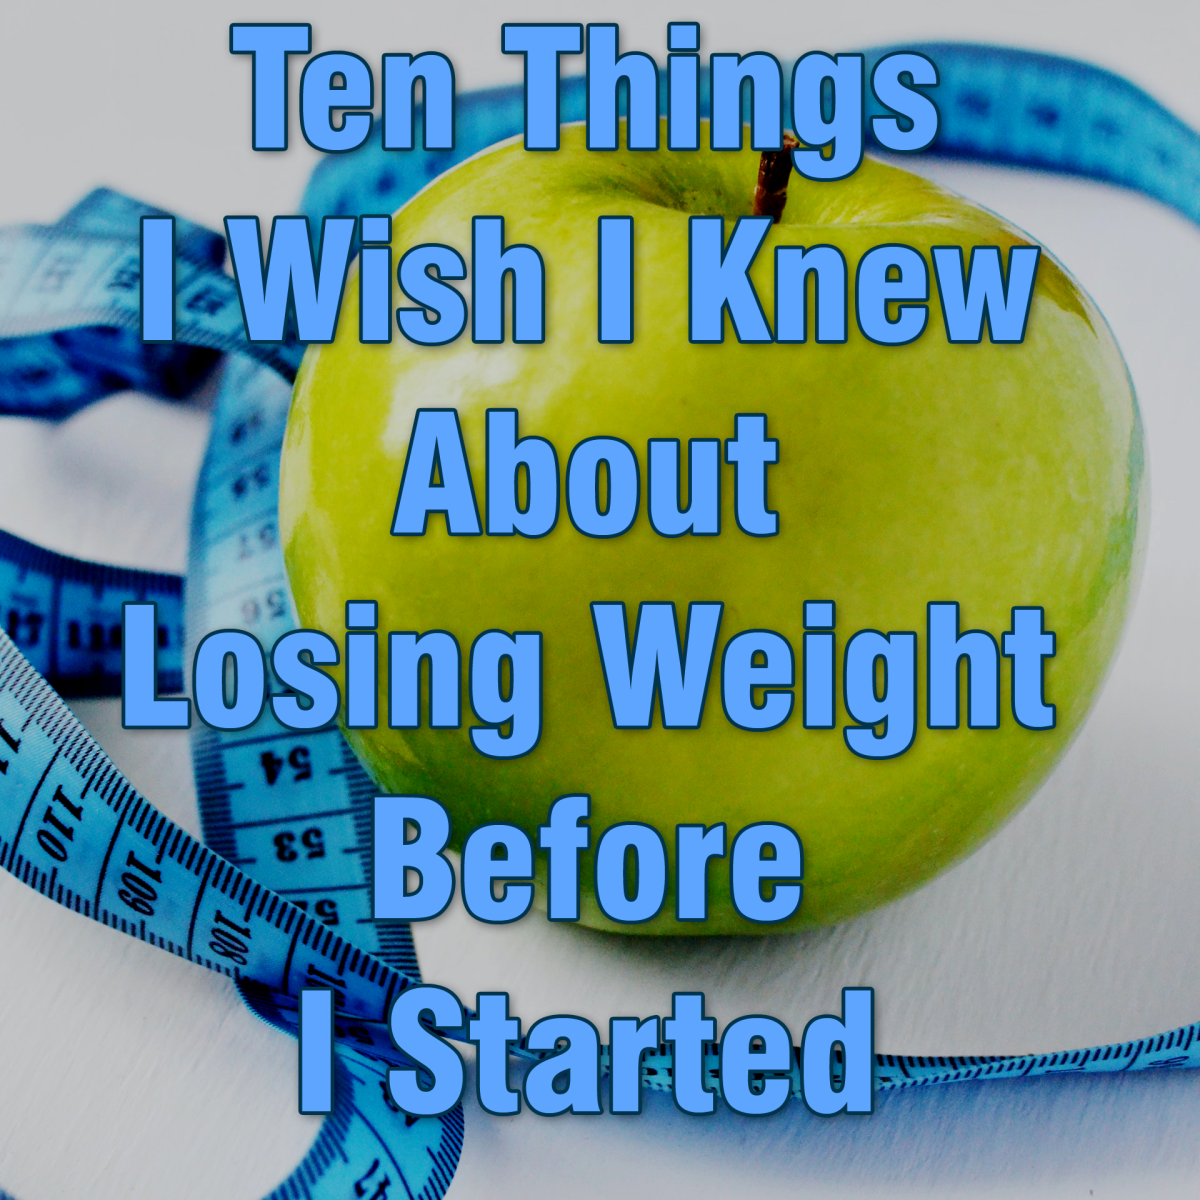 Ten Things I Wish I Knew About Losing Weight Before I Started